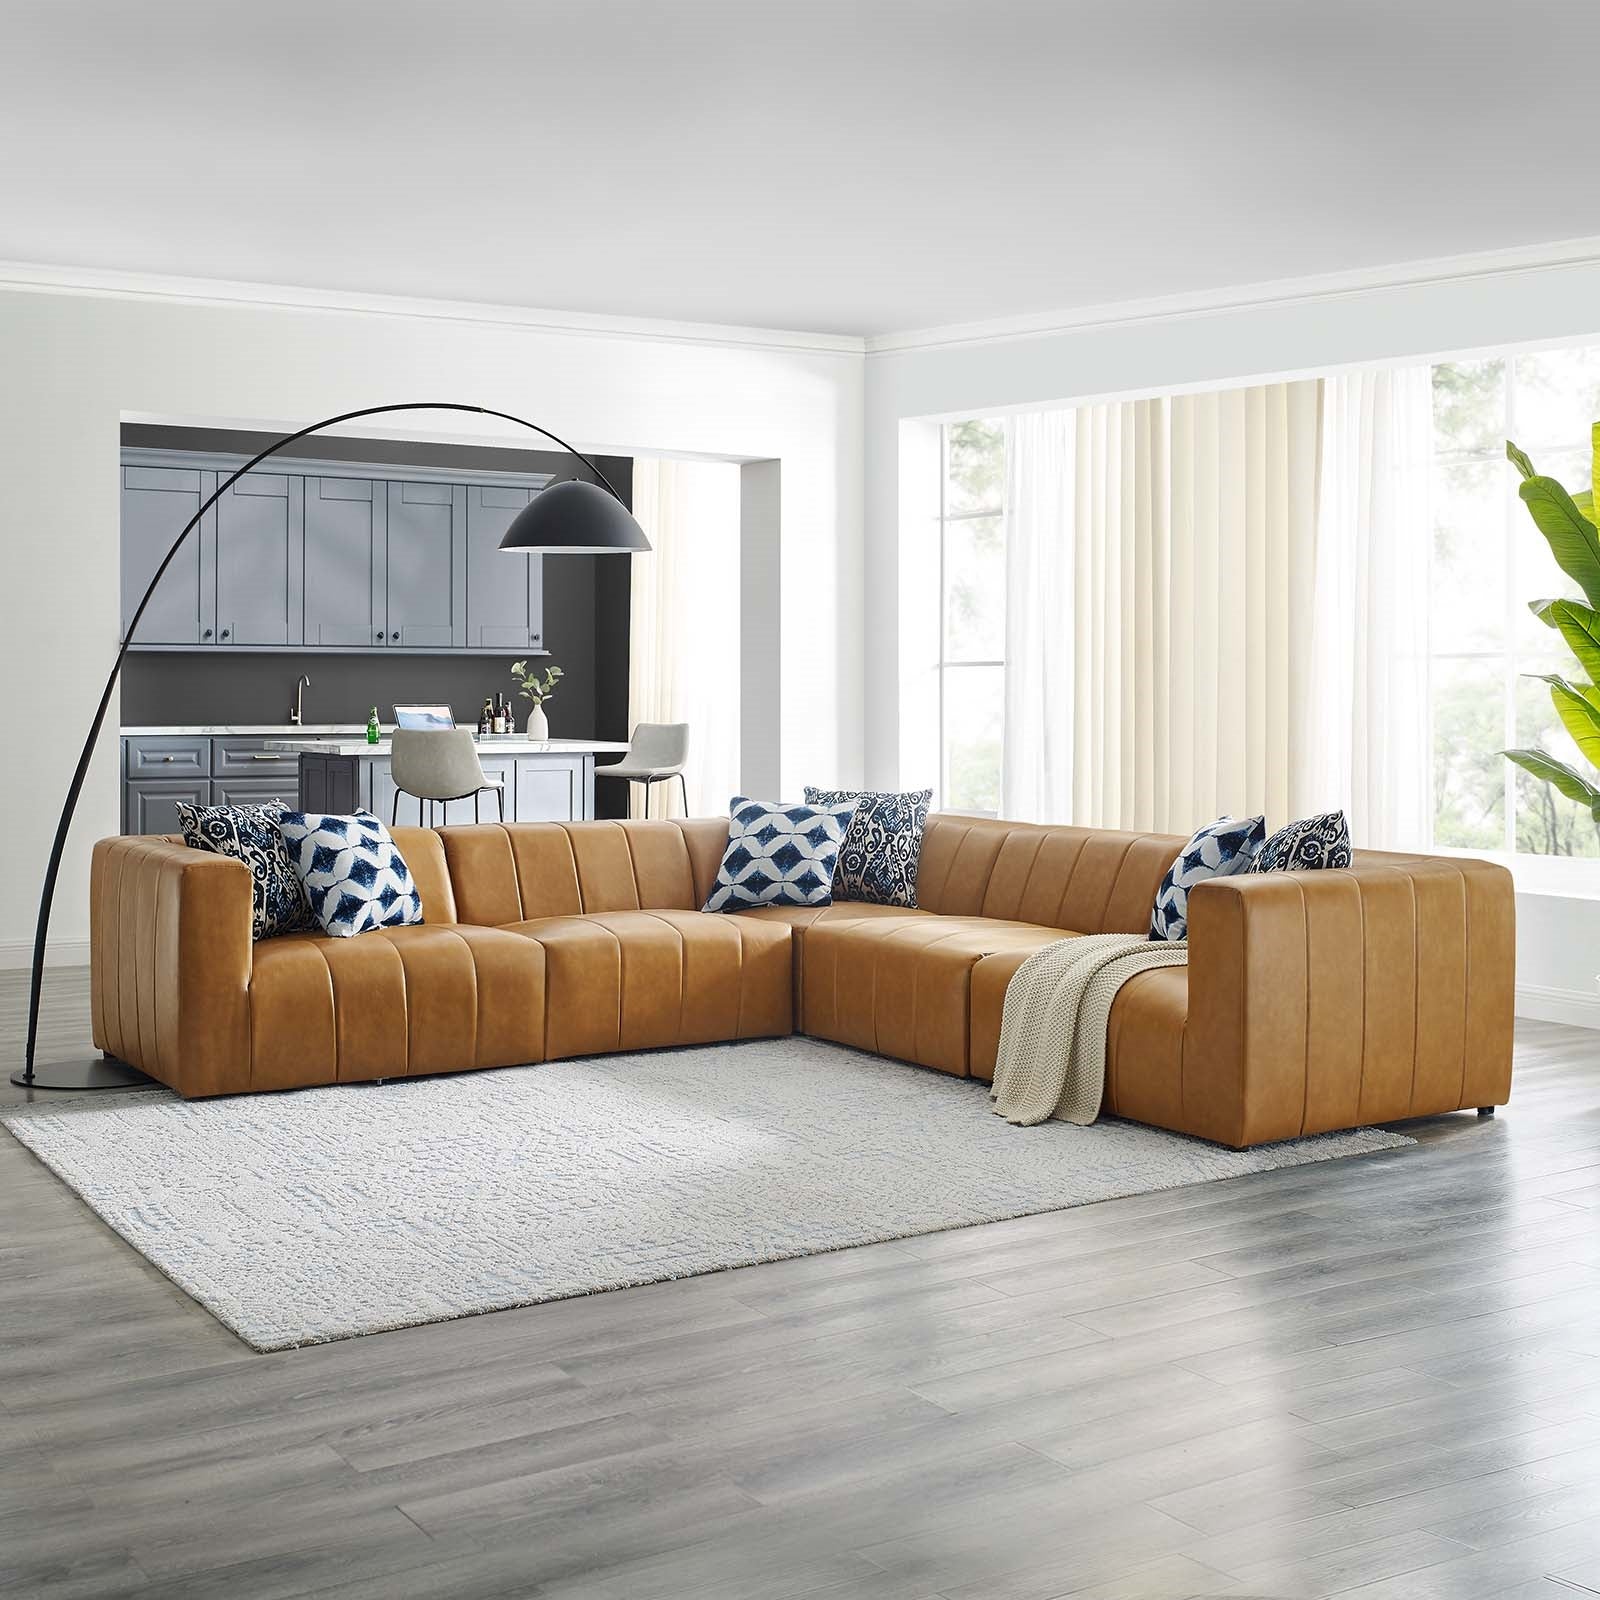 Colton Vegan Leather 5-Piece Sectional Sofa in Tan